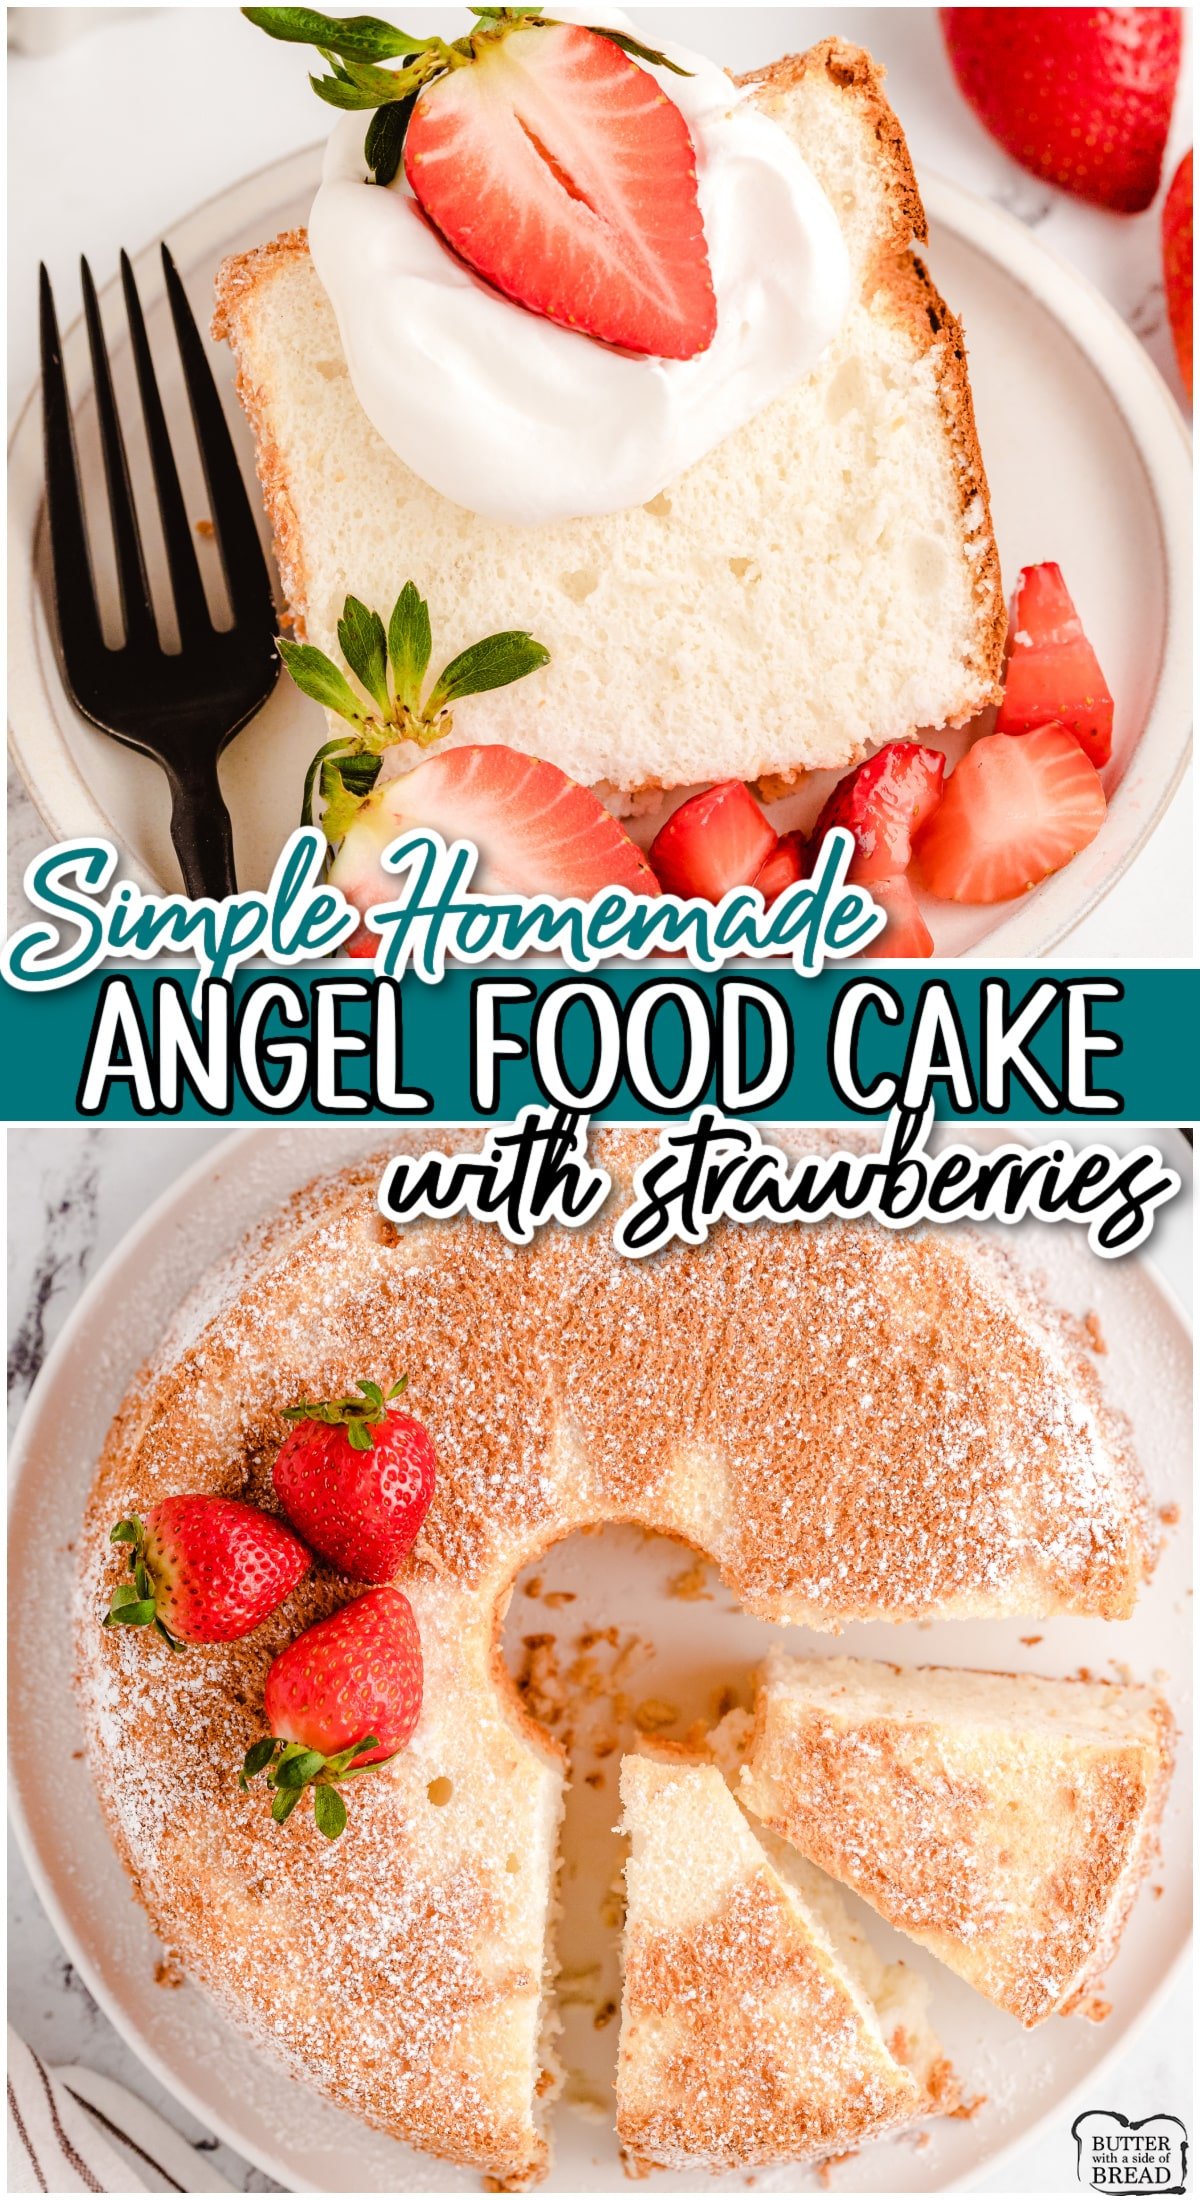 Angel Food Cake with Strawberries made with a from-scratch light & airy cake recipe & topped with sweetened berries & fresh cream. Perfect strawberry dessert! 